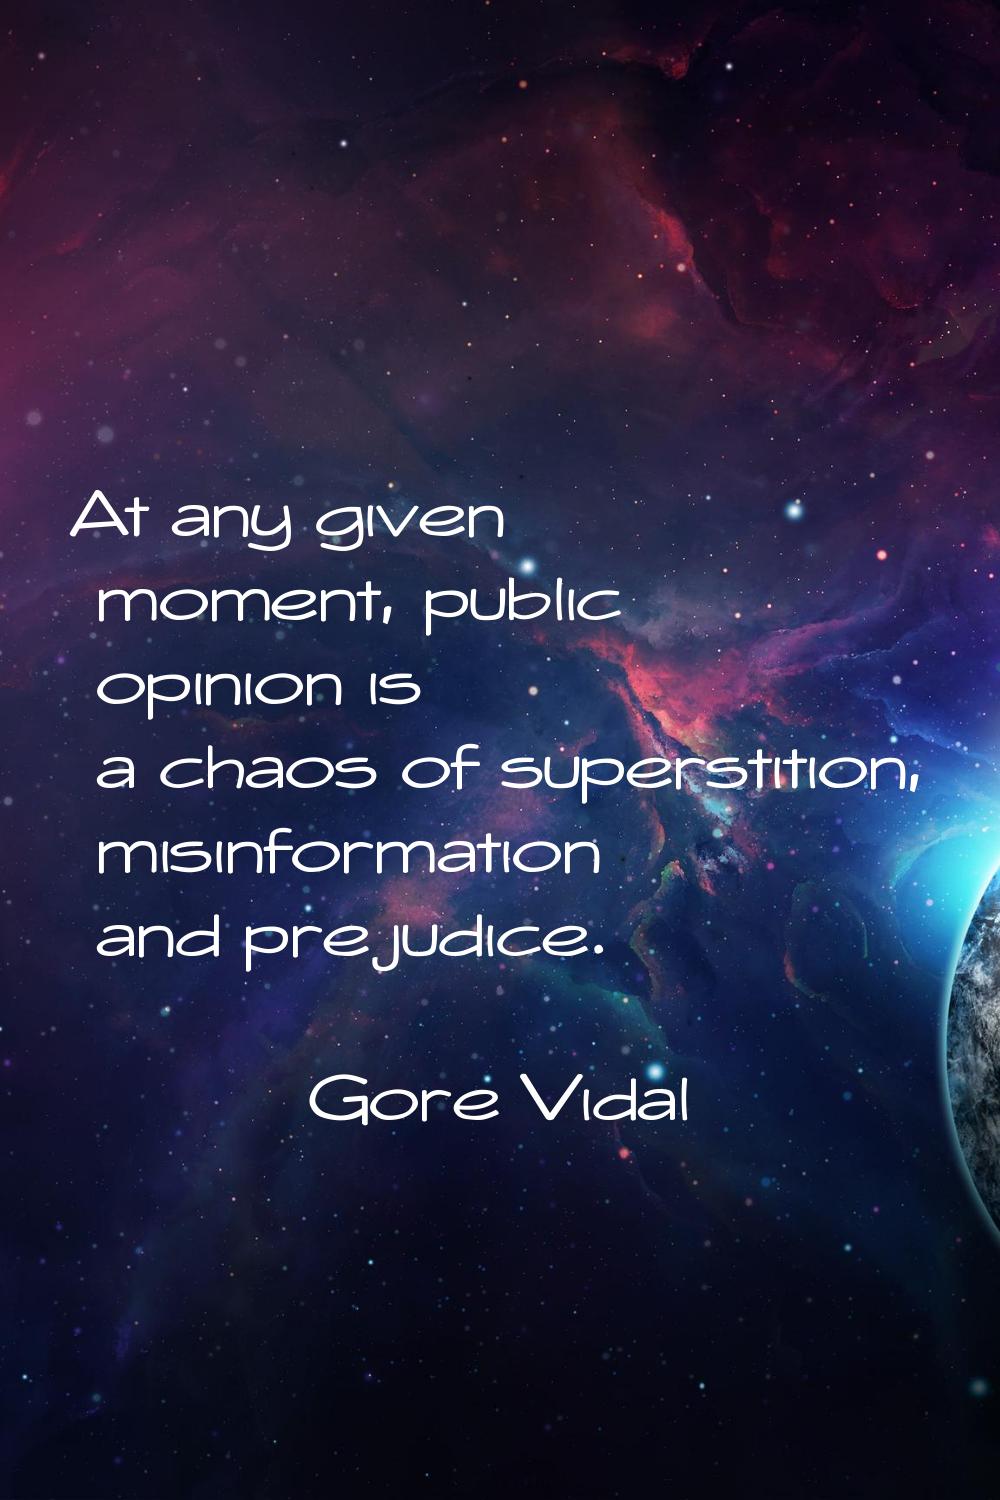 At any given moment, public opinion is a chaos of superstition, misinformation and prejudice.